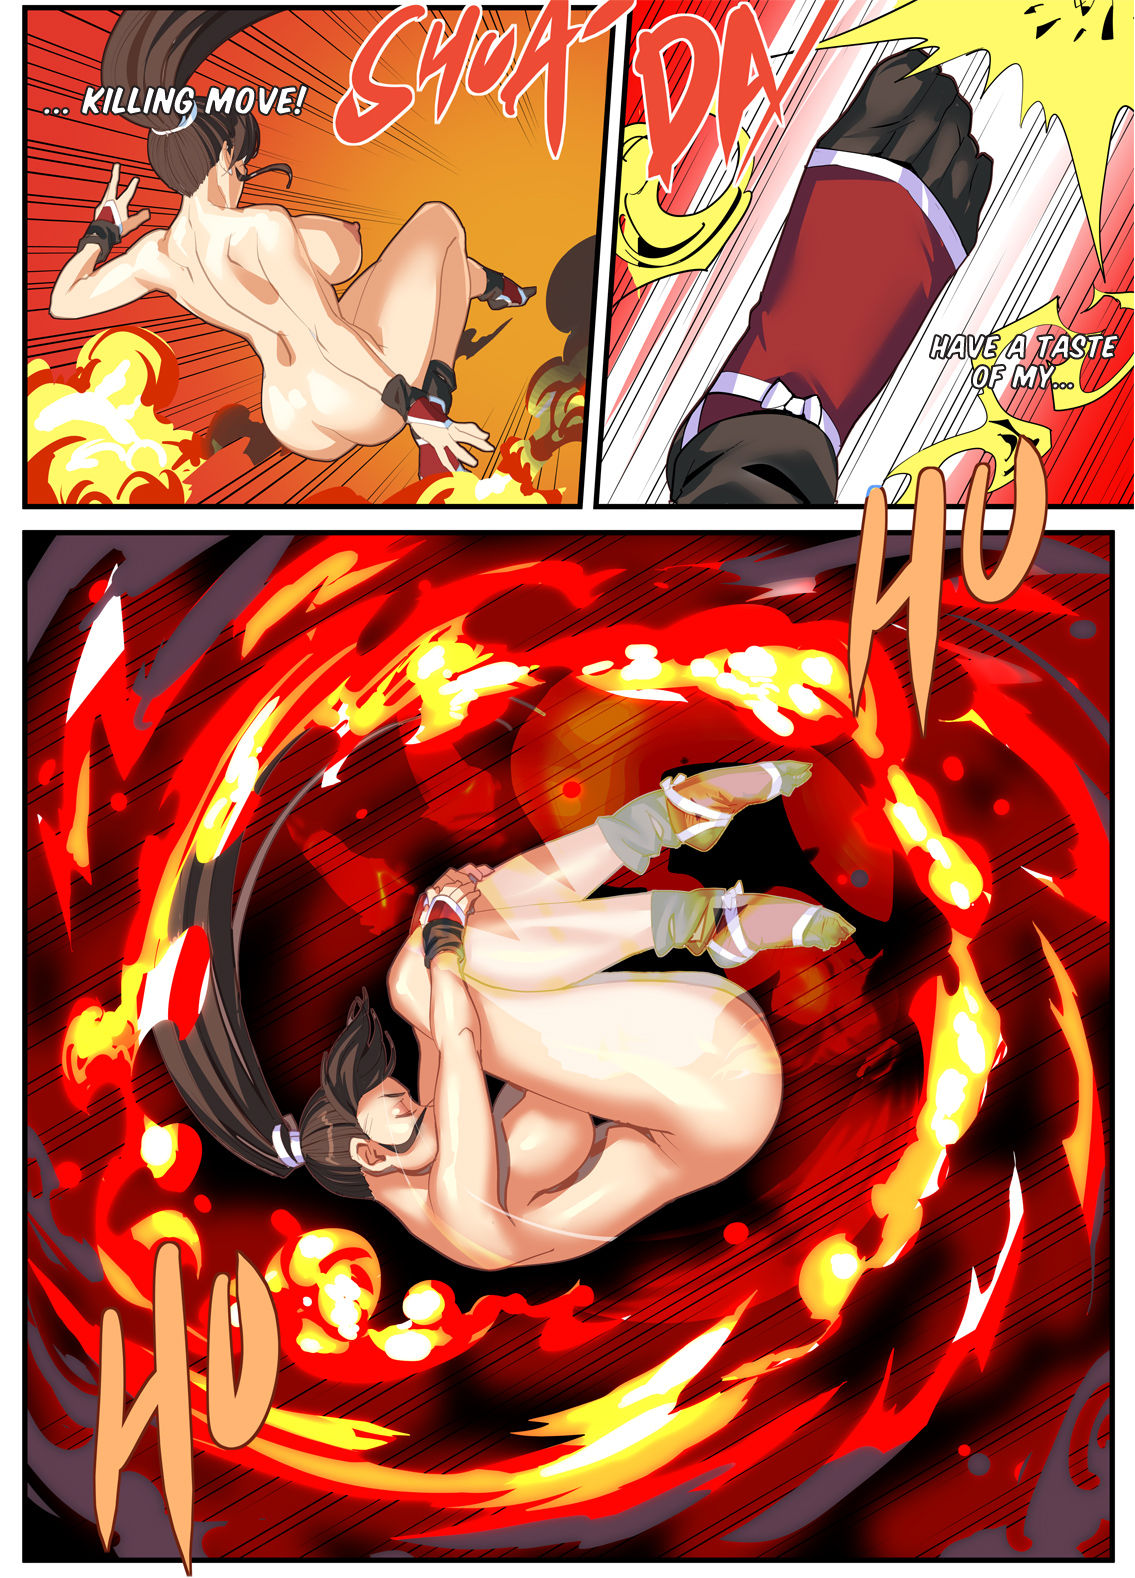 [chunlieater] The Lust of Mai Shiranui (King of Fighters) [English] [Yorkchoi & Twist] page 29 full